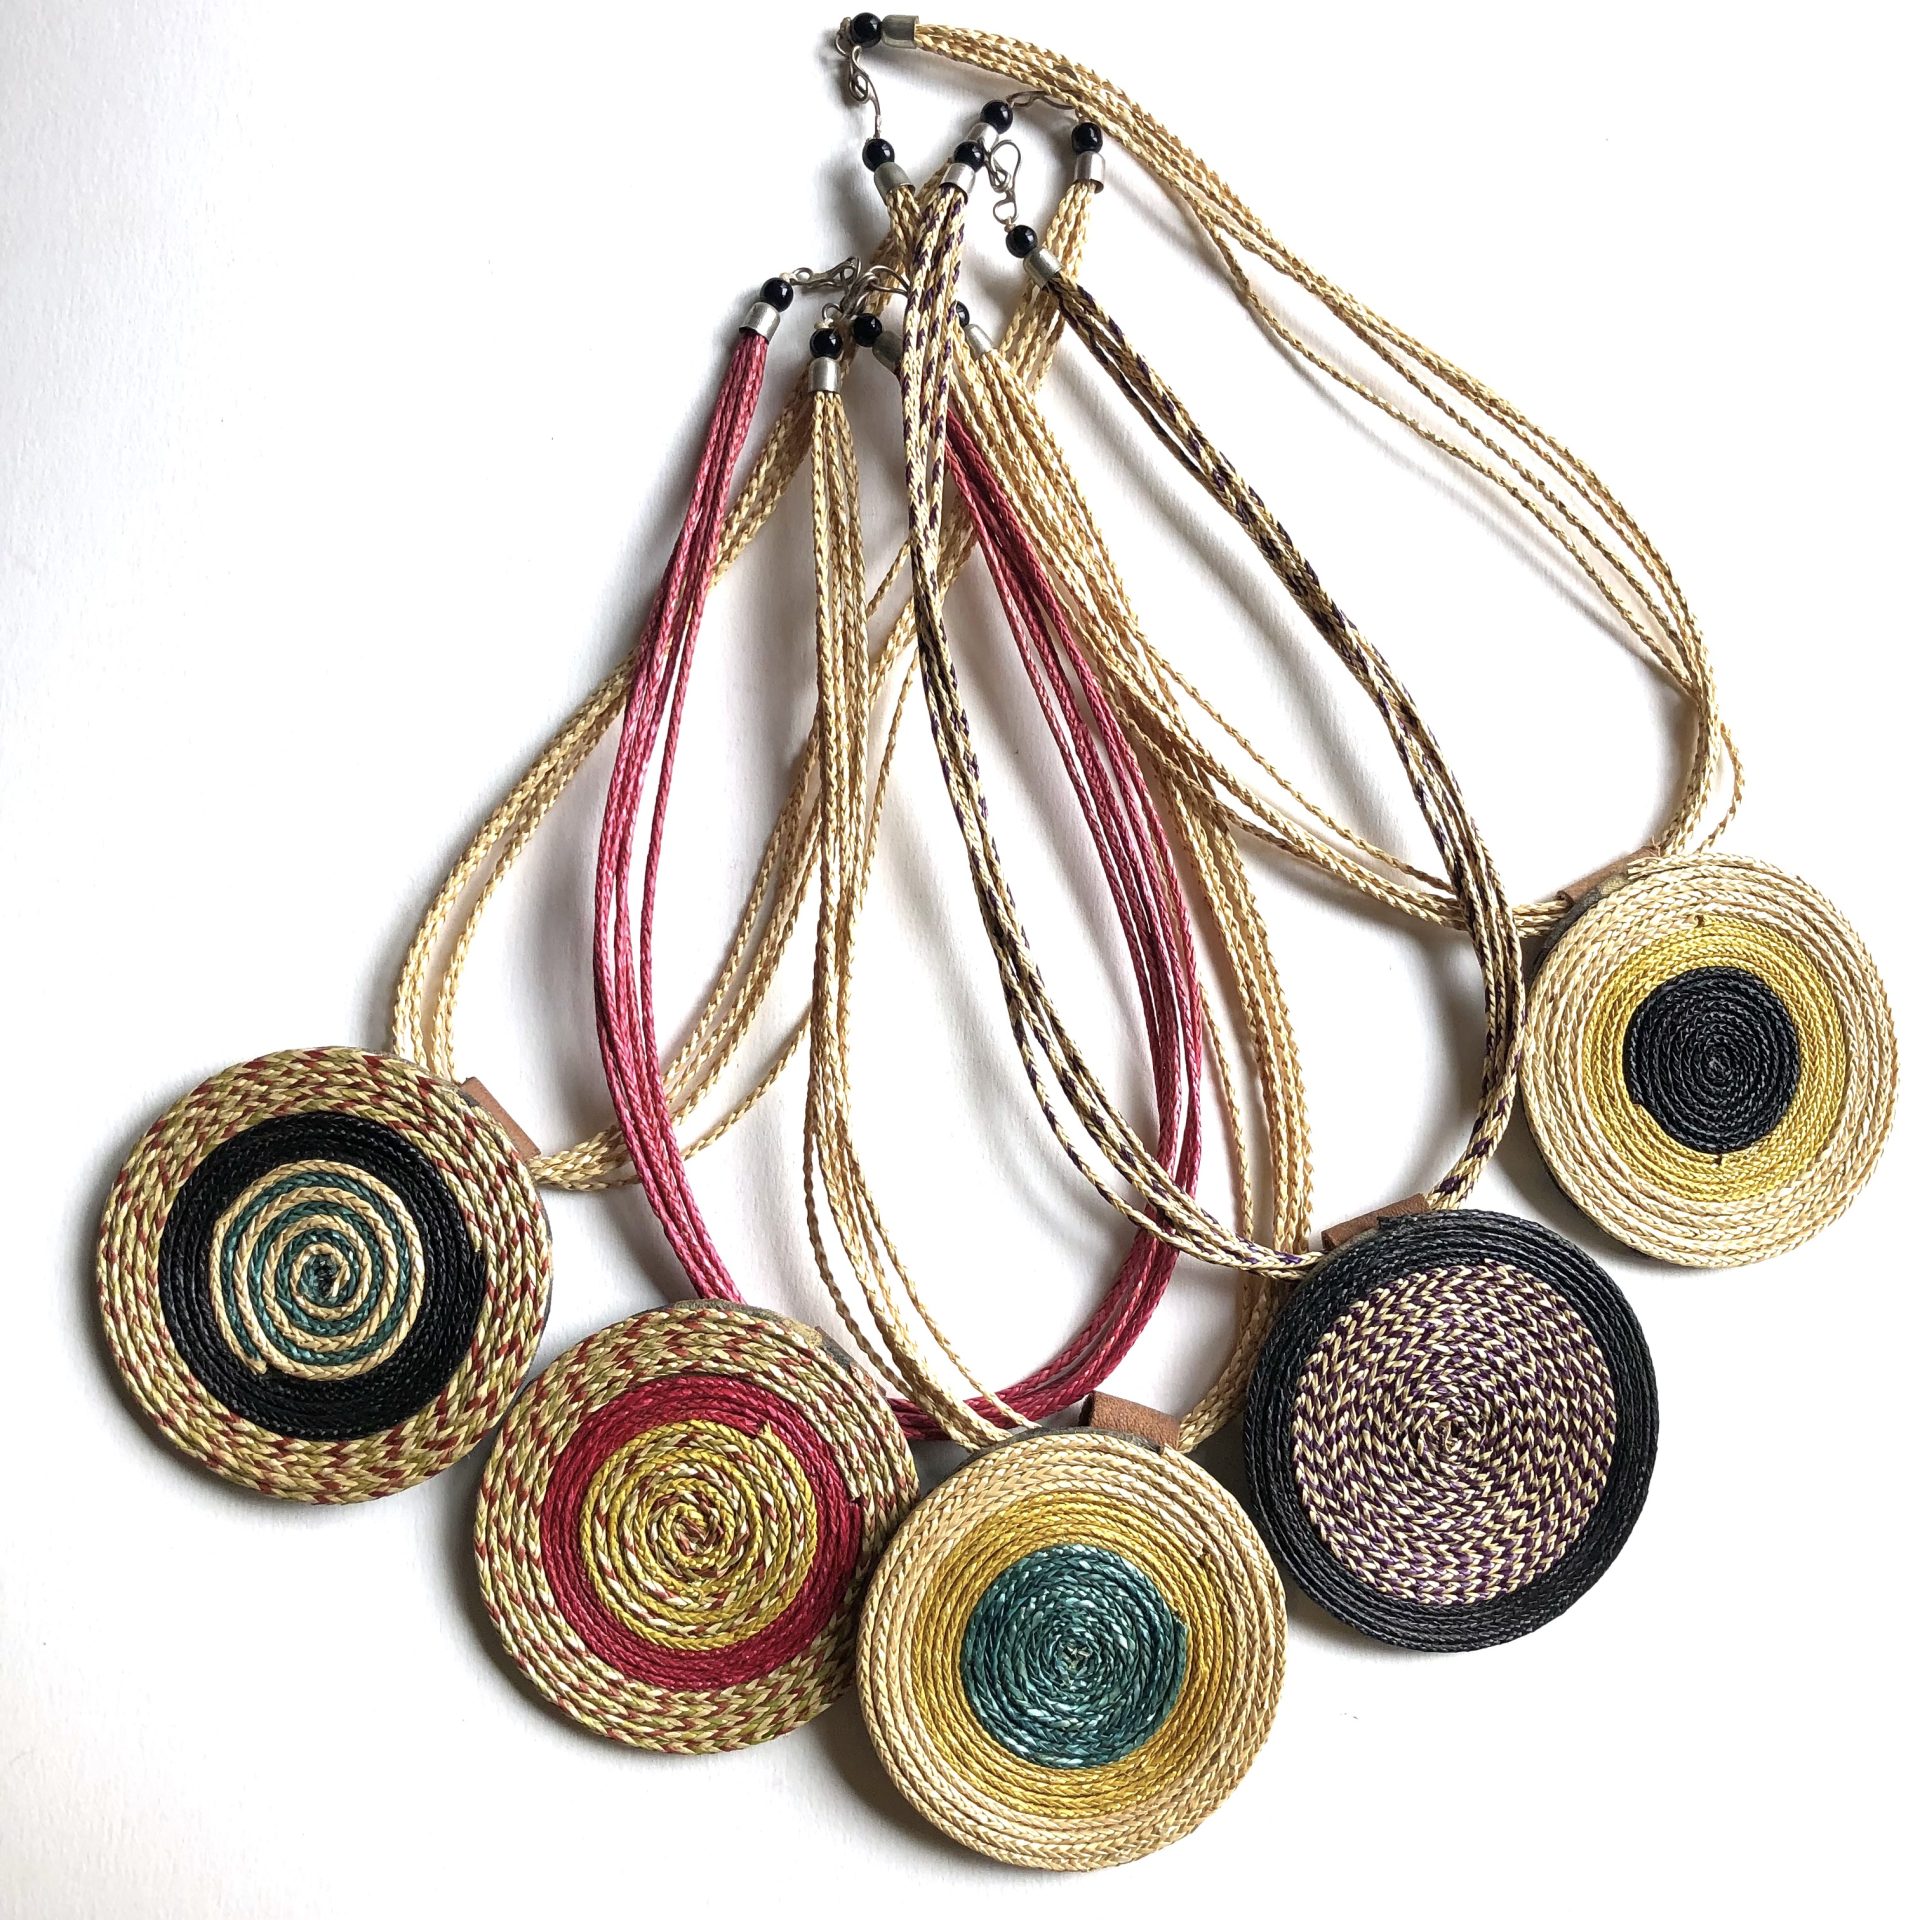 Colourful Sisal Necklaces